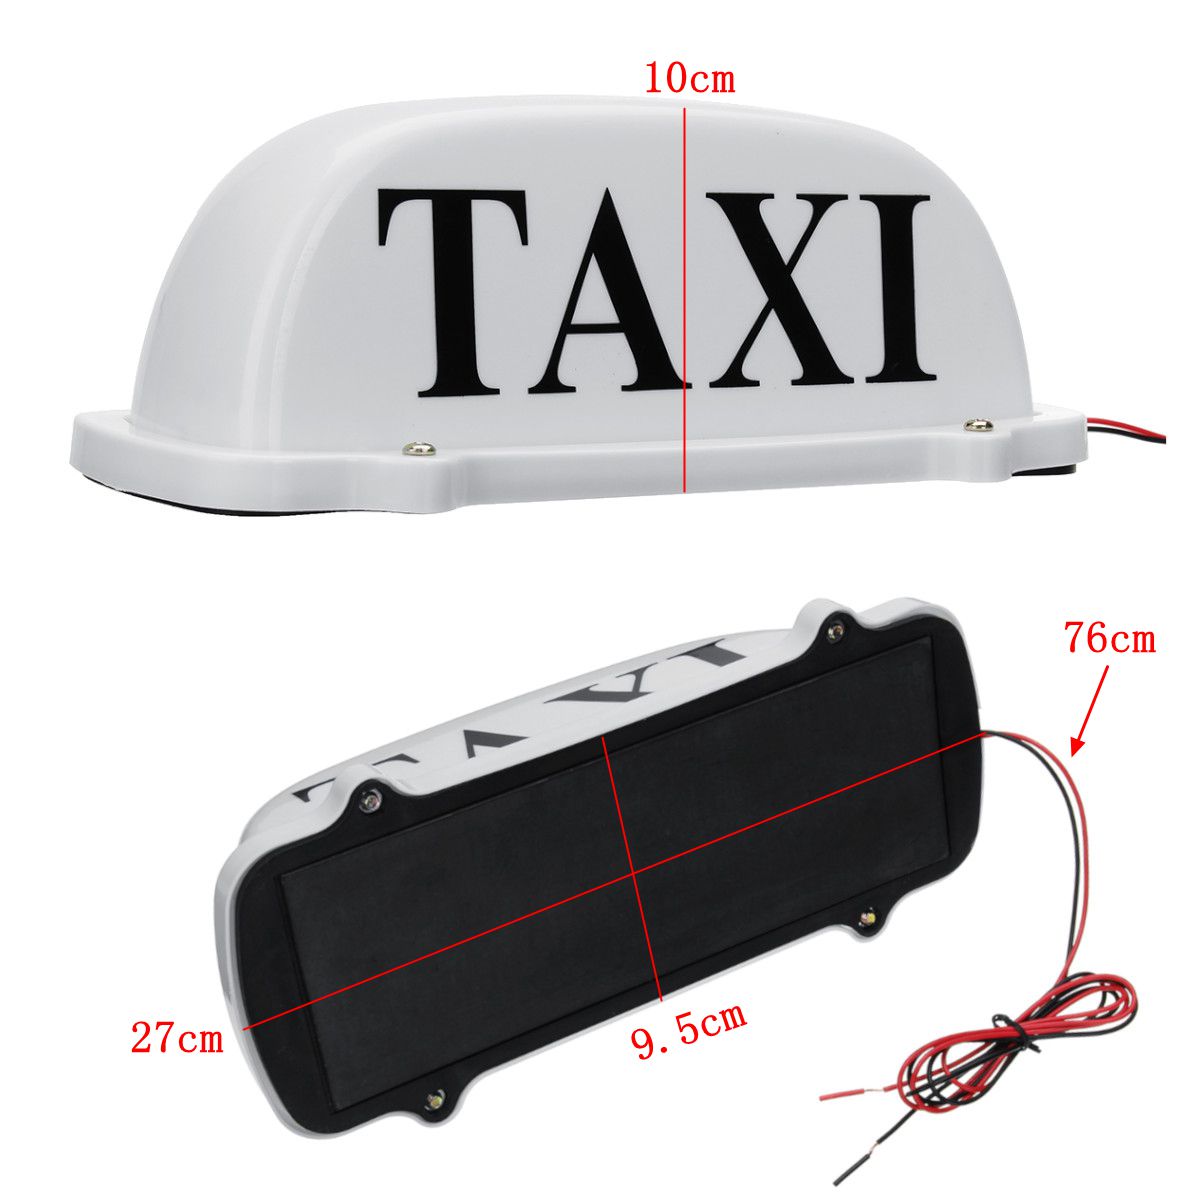 Taxi-Magnetic-Base-Yellow-LED-Cab-Taximeter-Roof-Top-Sign-Light-Lamp-White-Box-1534188